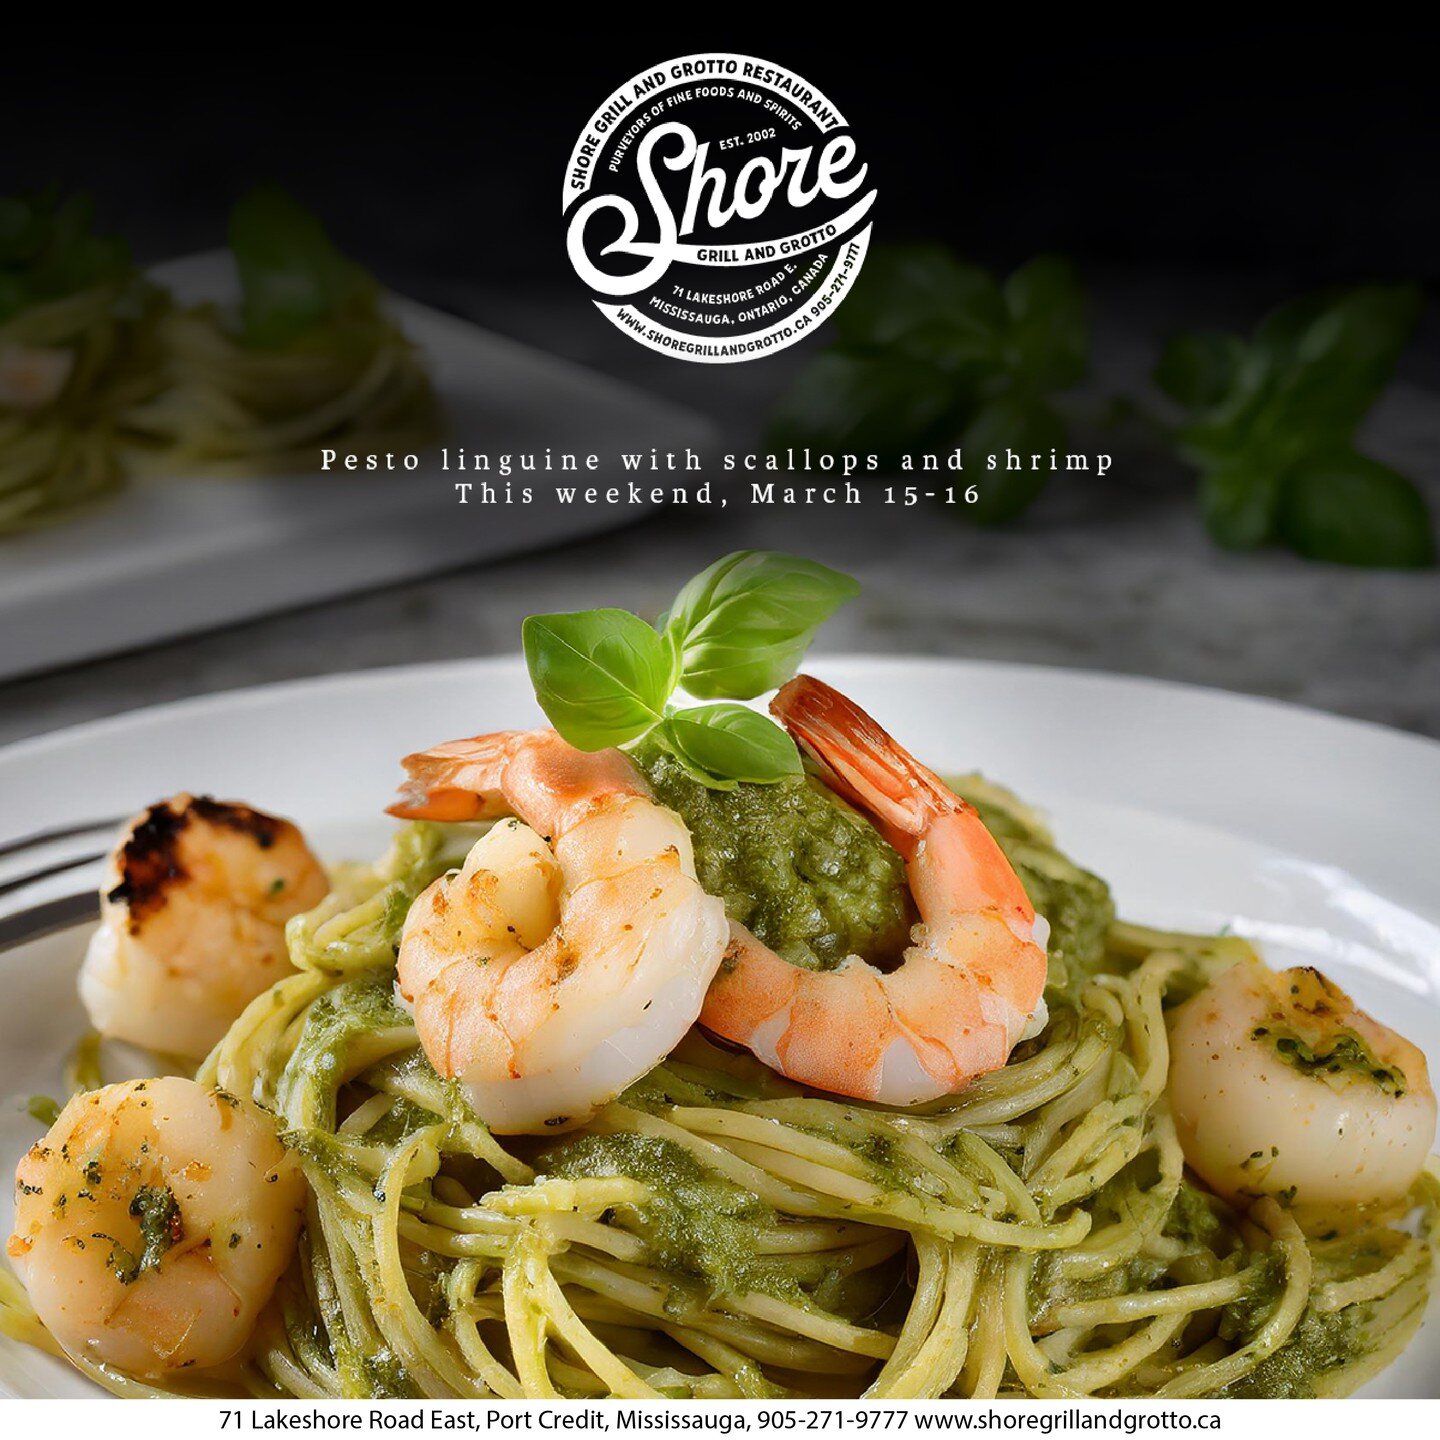 Savor the vibrant flavors of our homemade pesto sauce, perfectly paired with al dente linguini, succulent scallops, and jumbo shrimp. This weekend at Shore! #mississaugafood #GTApatio #patio #mississaugabar #mississaugafood #patios #patiolife #saugae